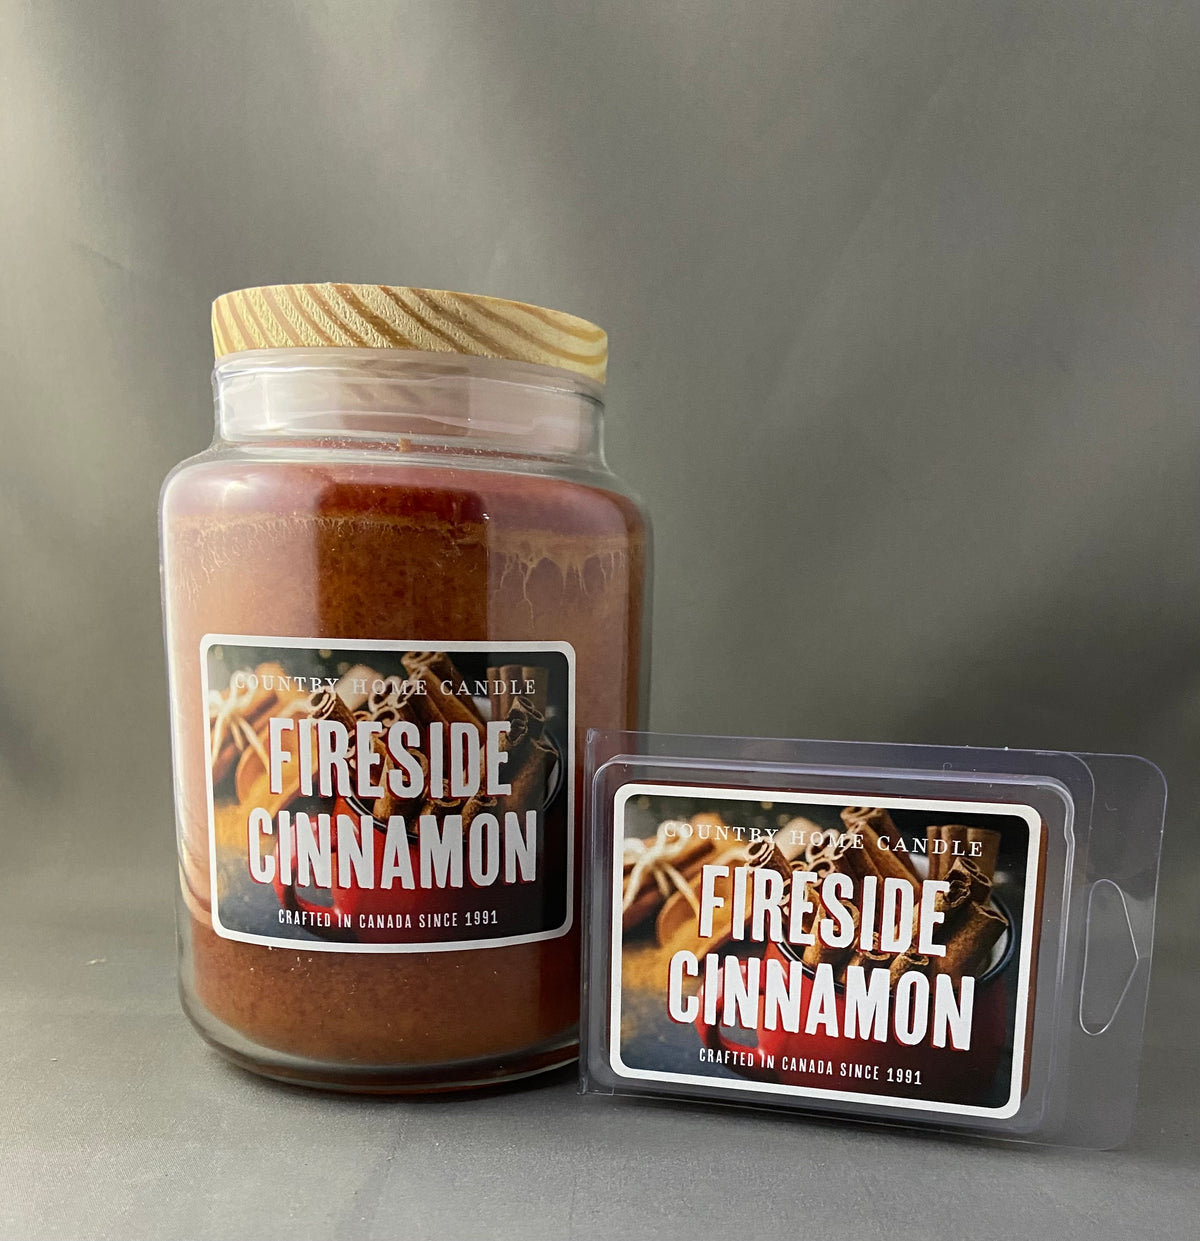 Country Home Fireside Cinnamon Candle and Wax Melts